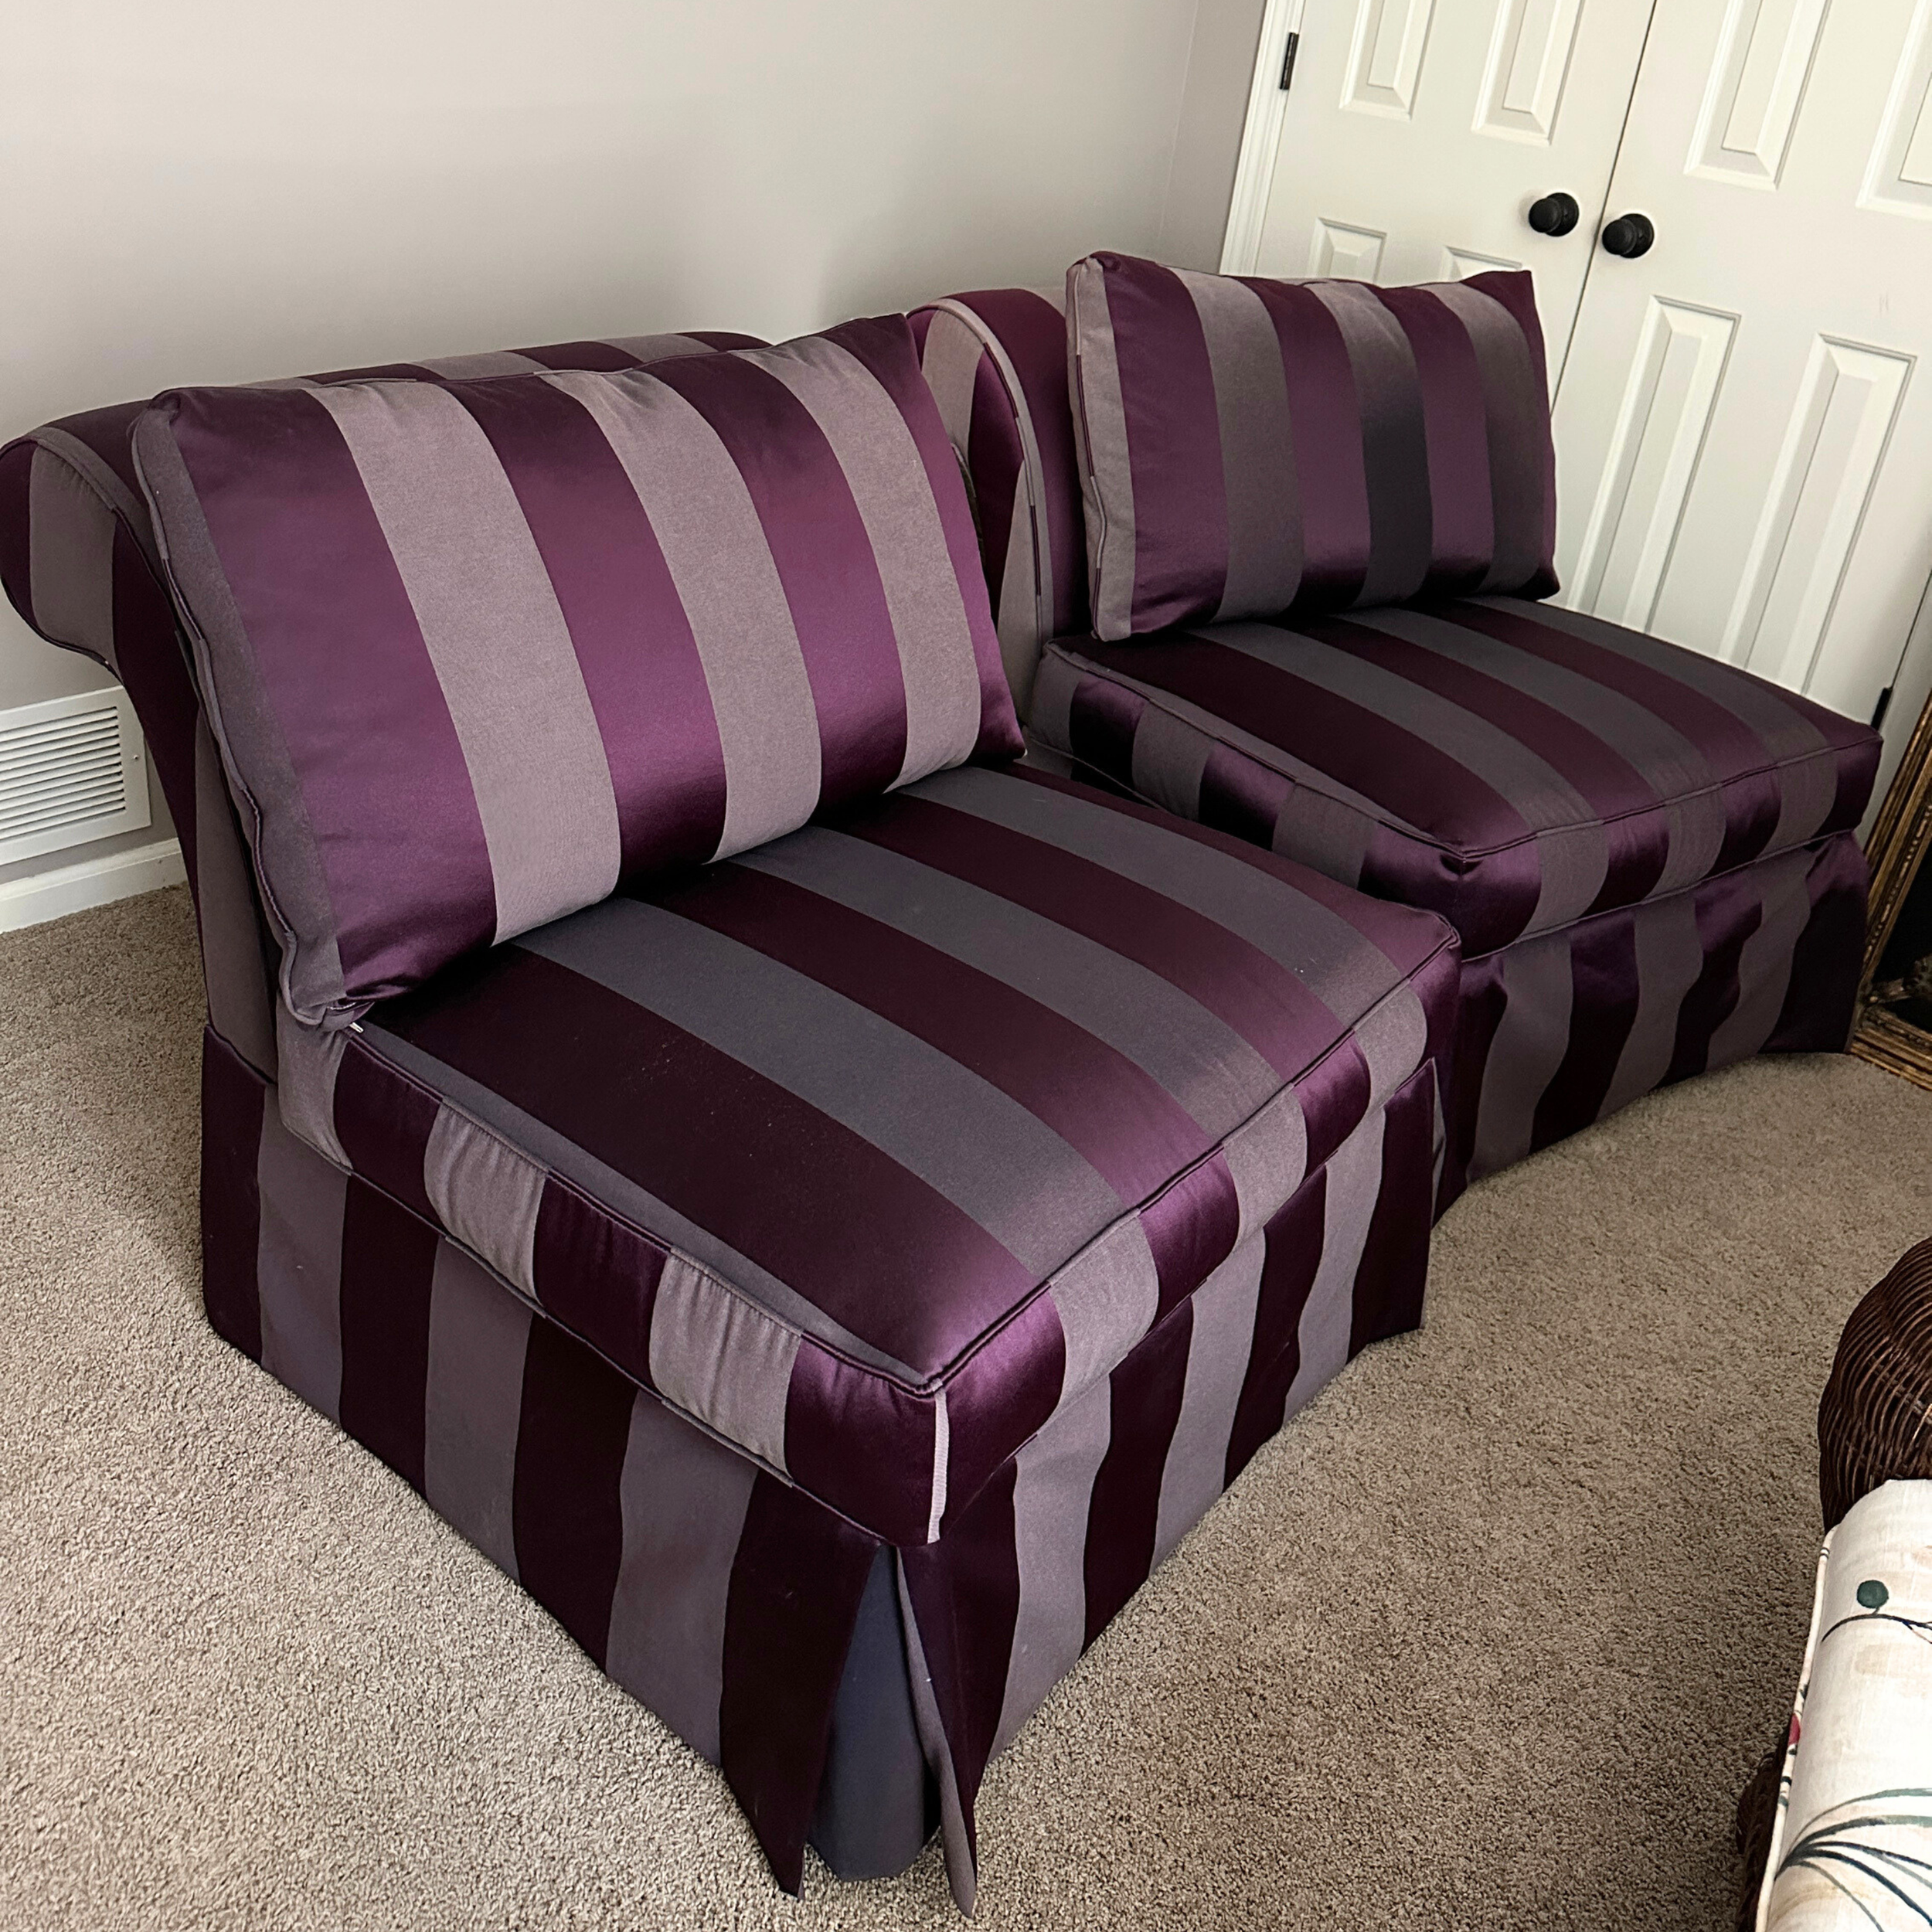 Pair of Purple Striped Slipper Chairs